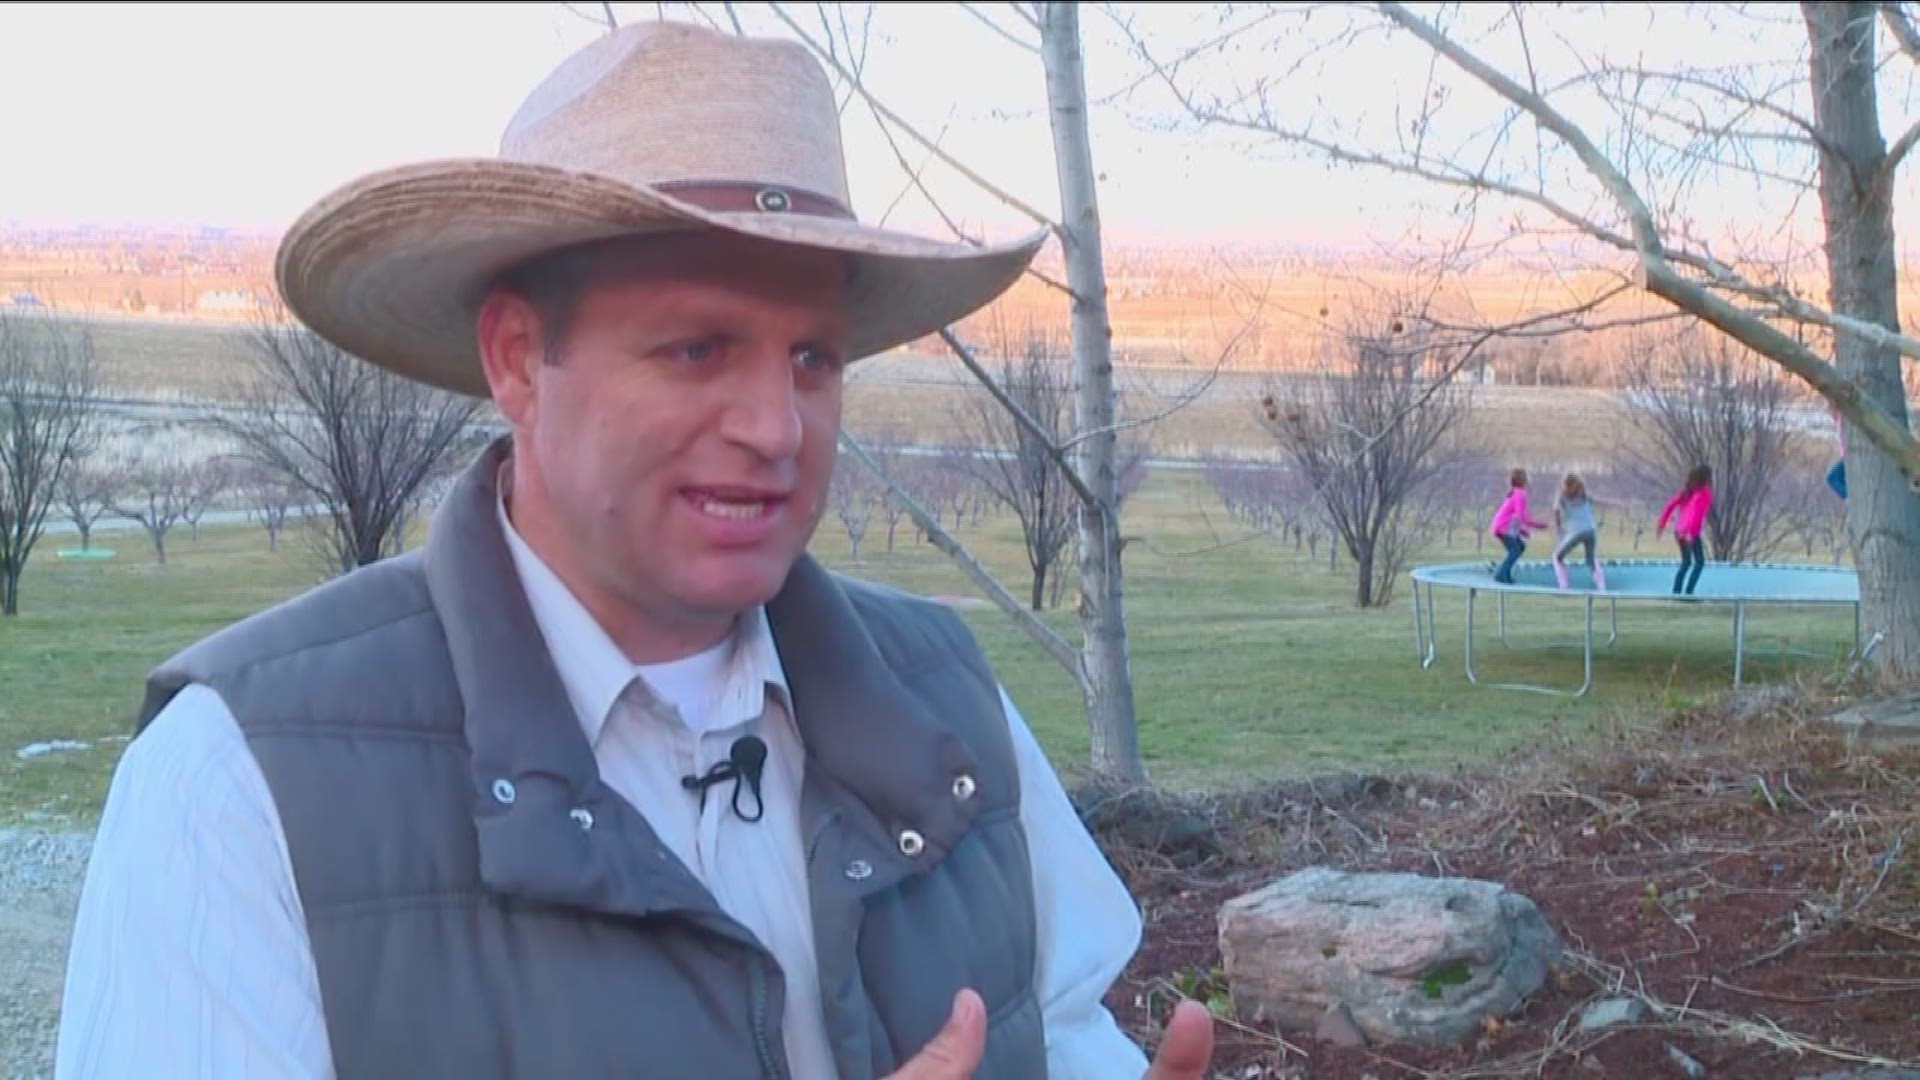 Ammon Bundy and his family were accused of leading an armed uprising against federal agents near their ranch in Nevada four years ago. On Monday, their case was thrown out - and the Bundys continue to defend their actions.